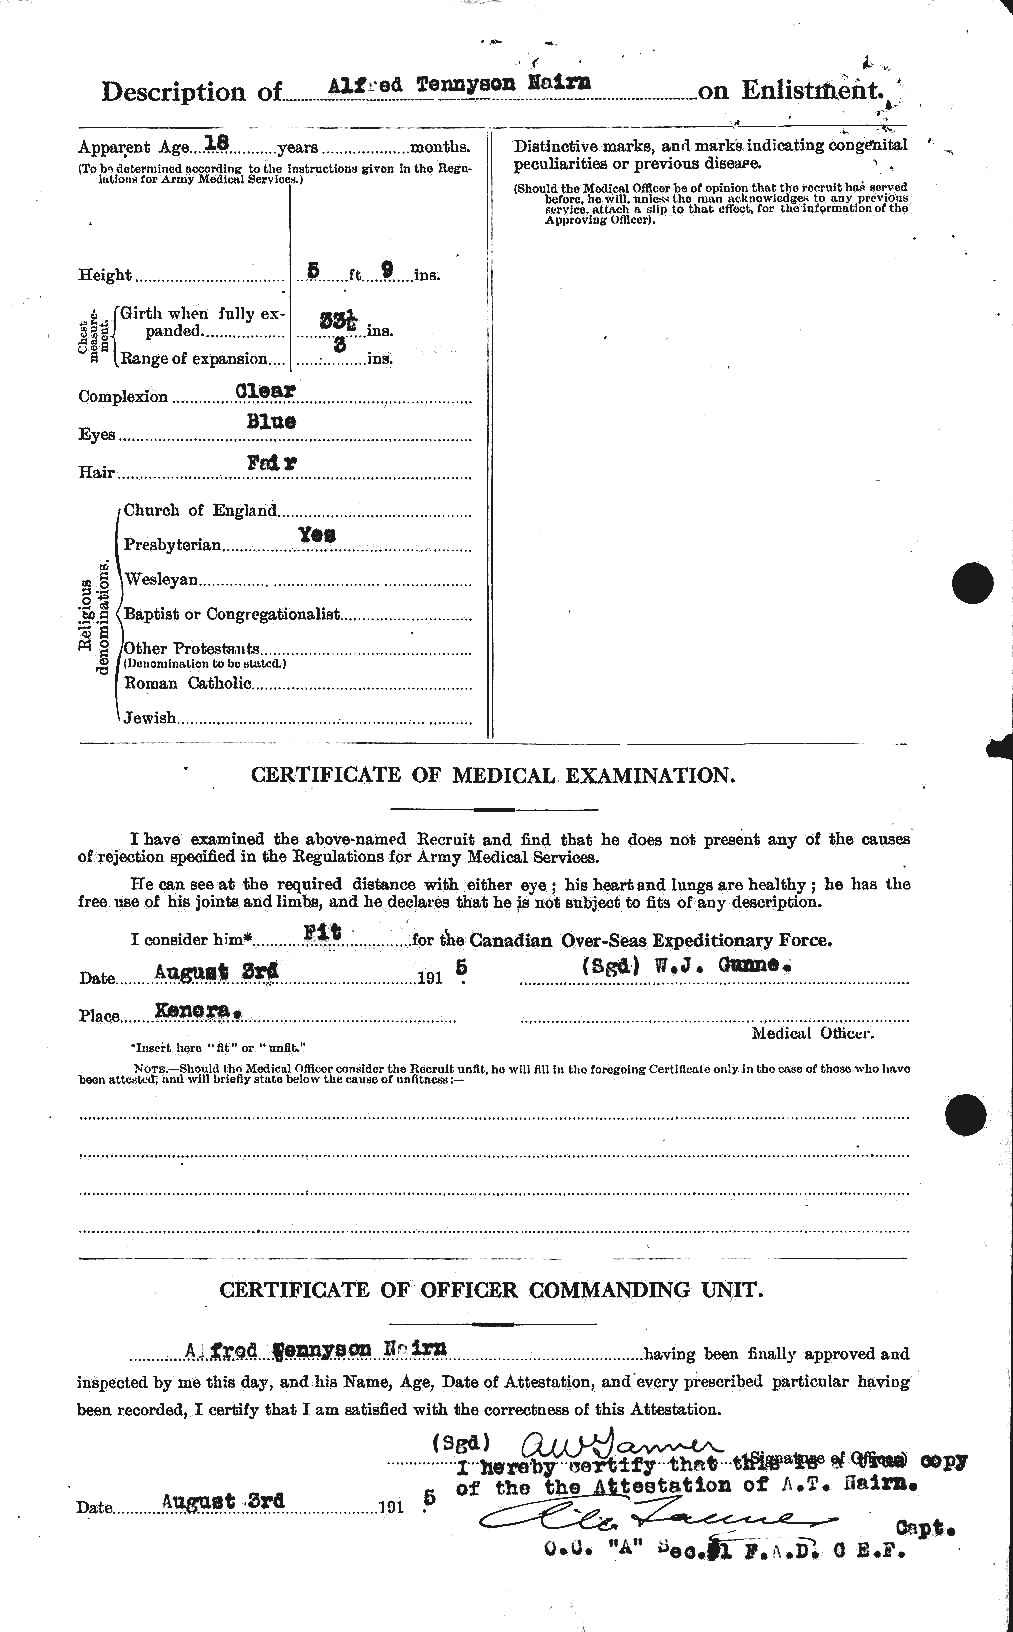 Personnel Records of the First World War - CEF 544381b